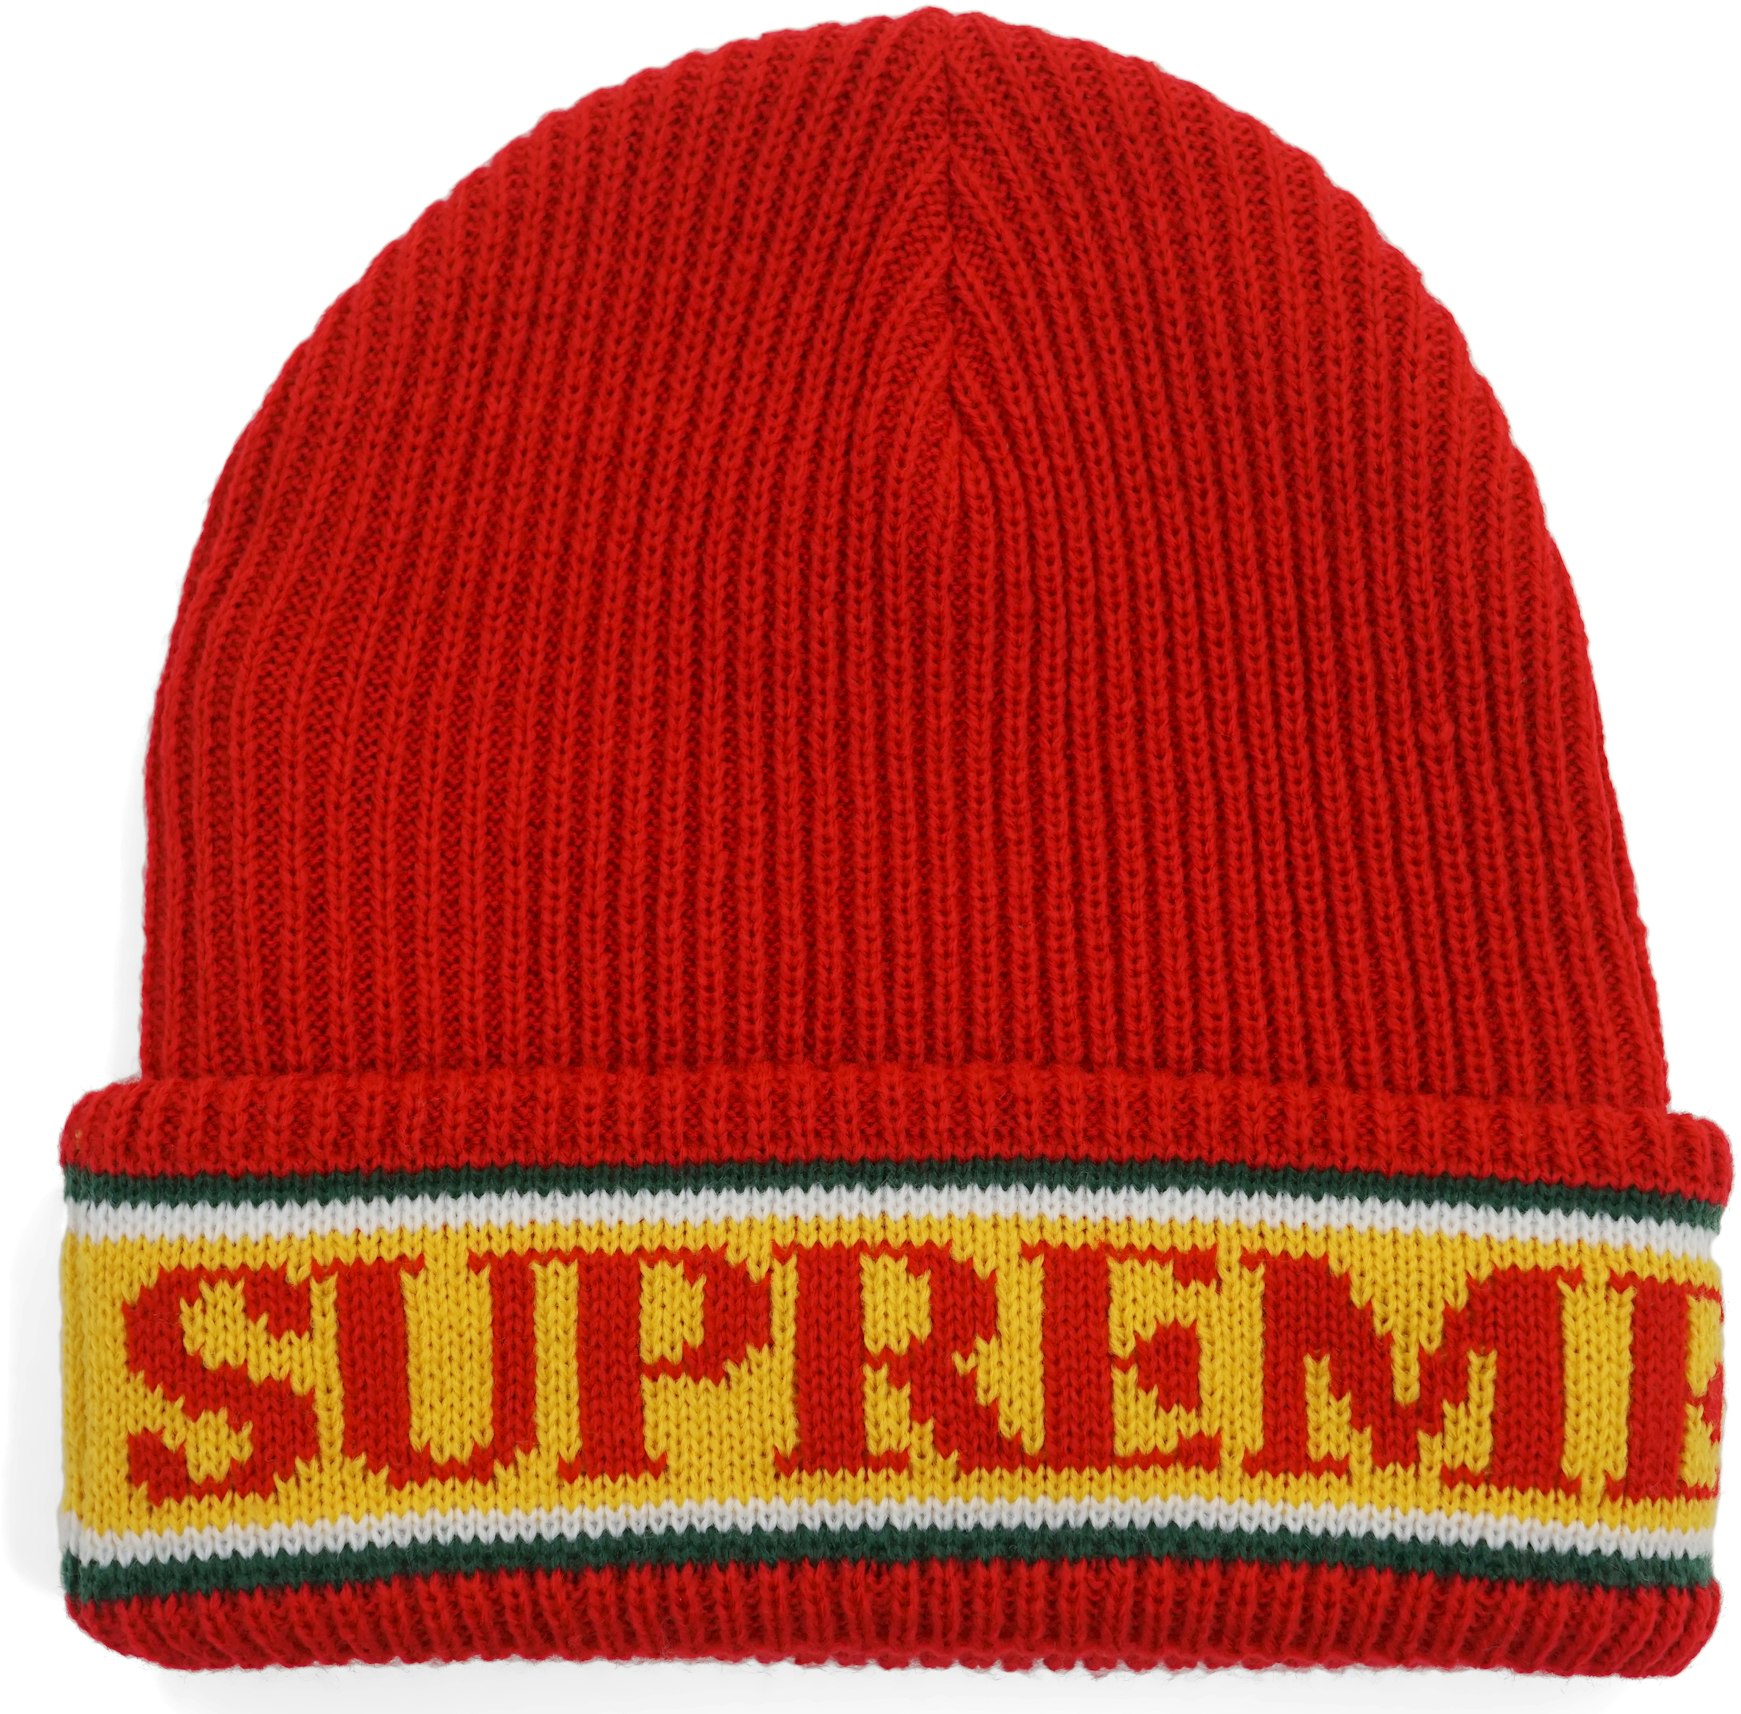 Resignation boble Klemme Supreme Cuff Logo Beanie Red - FW18 - US